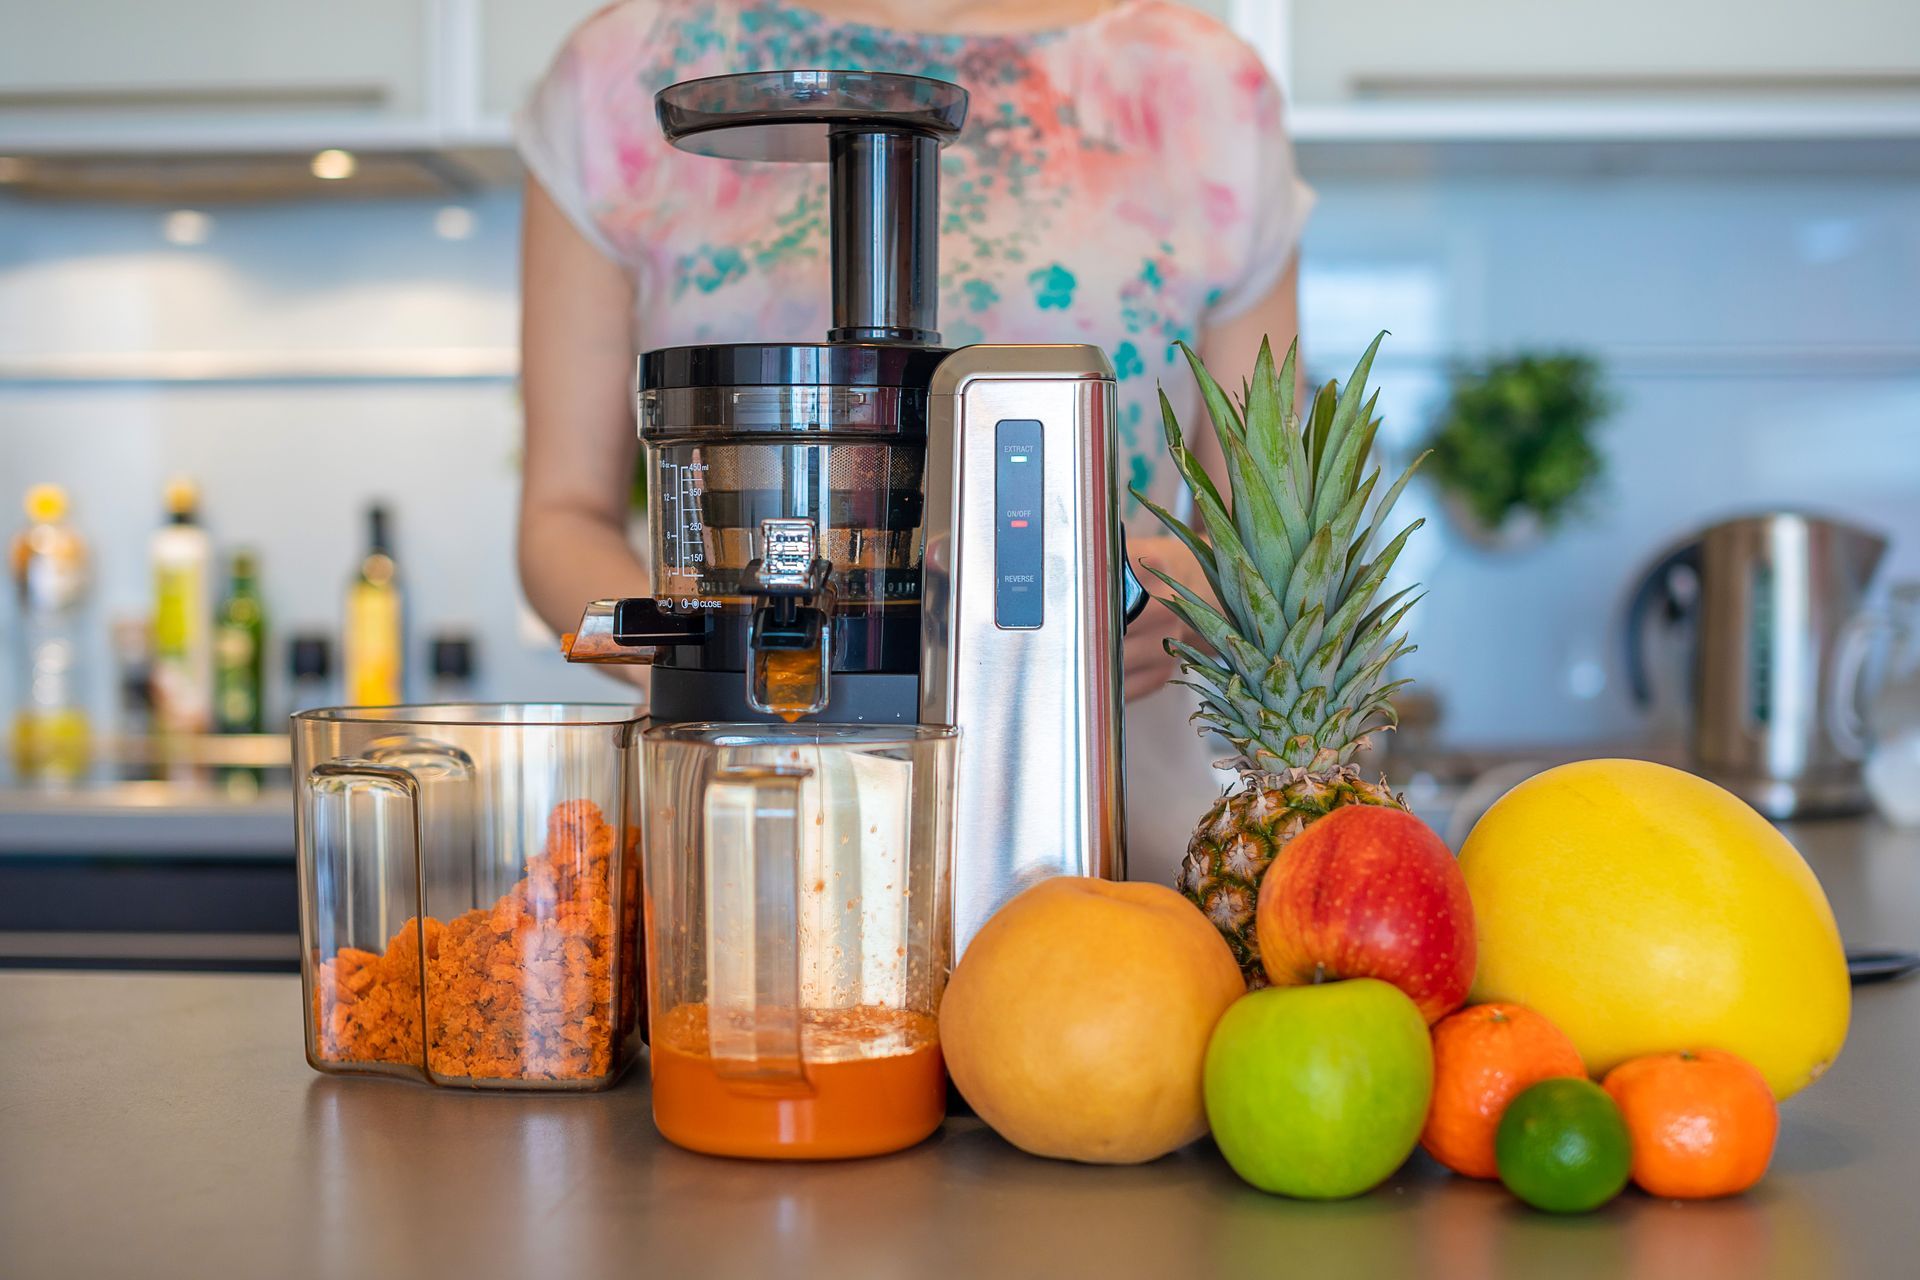 A woman is using a juicer to make juice in a kitchen.